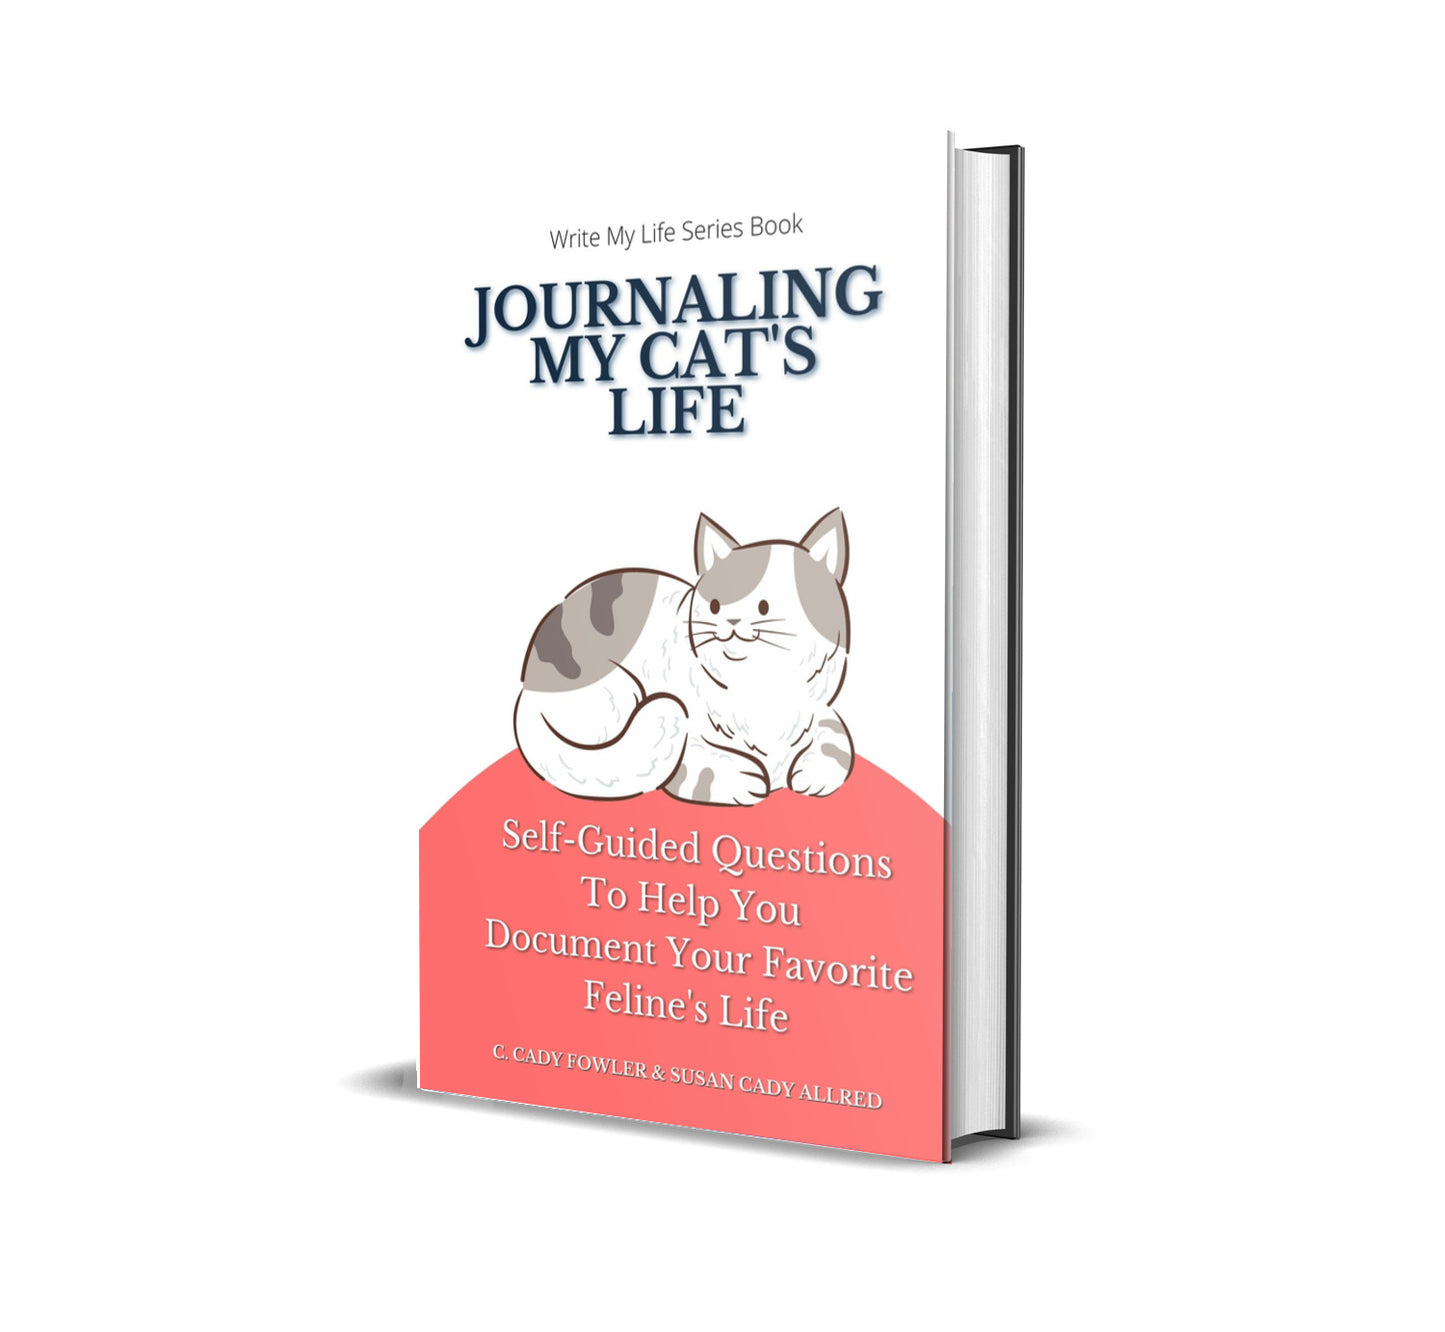 Journaling My Cat's Life: Self-Guided Questions To Help You Document Your Favorite Feline's Life